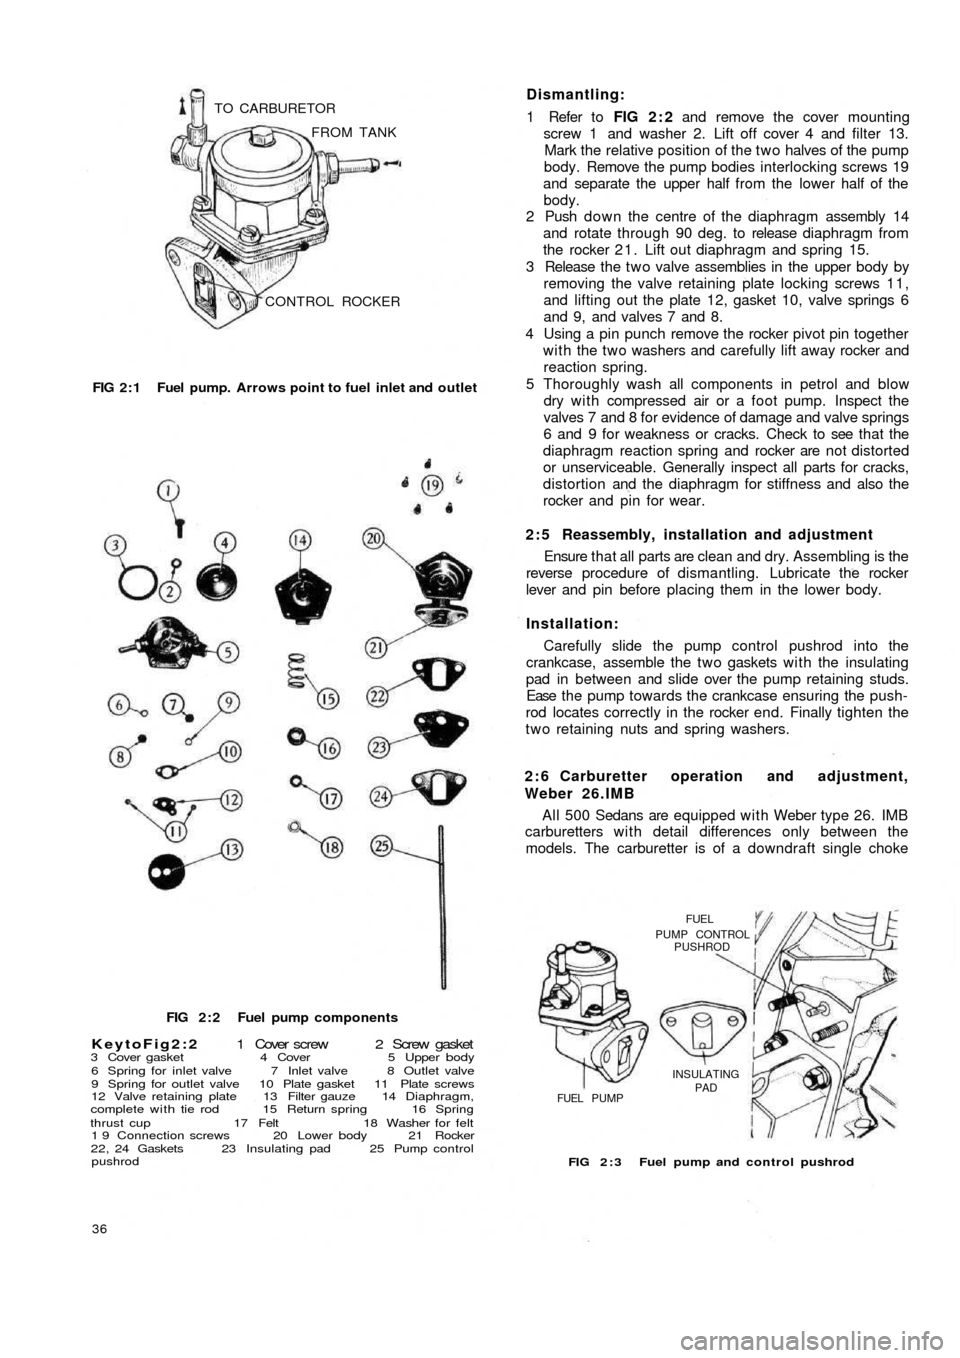 FIAT 500 1957 1.G Workshop Manual CONTROL ROCKER FROM TANK TO CARBURETOR
FIG 2 : 1  Fuel pump. Arrows point to fuel  inlet and outlet
FIG 2 : 2  Fuel pump components
KeytoFig2:2 1  Cover  screw  2  Screw  gasket3 Cover gasket 4 Cover 